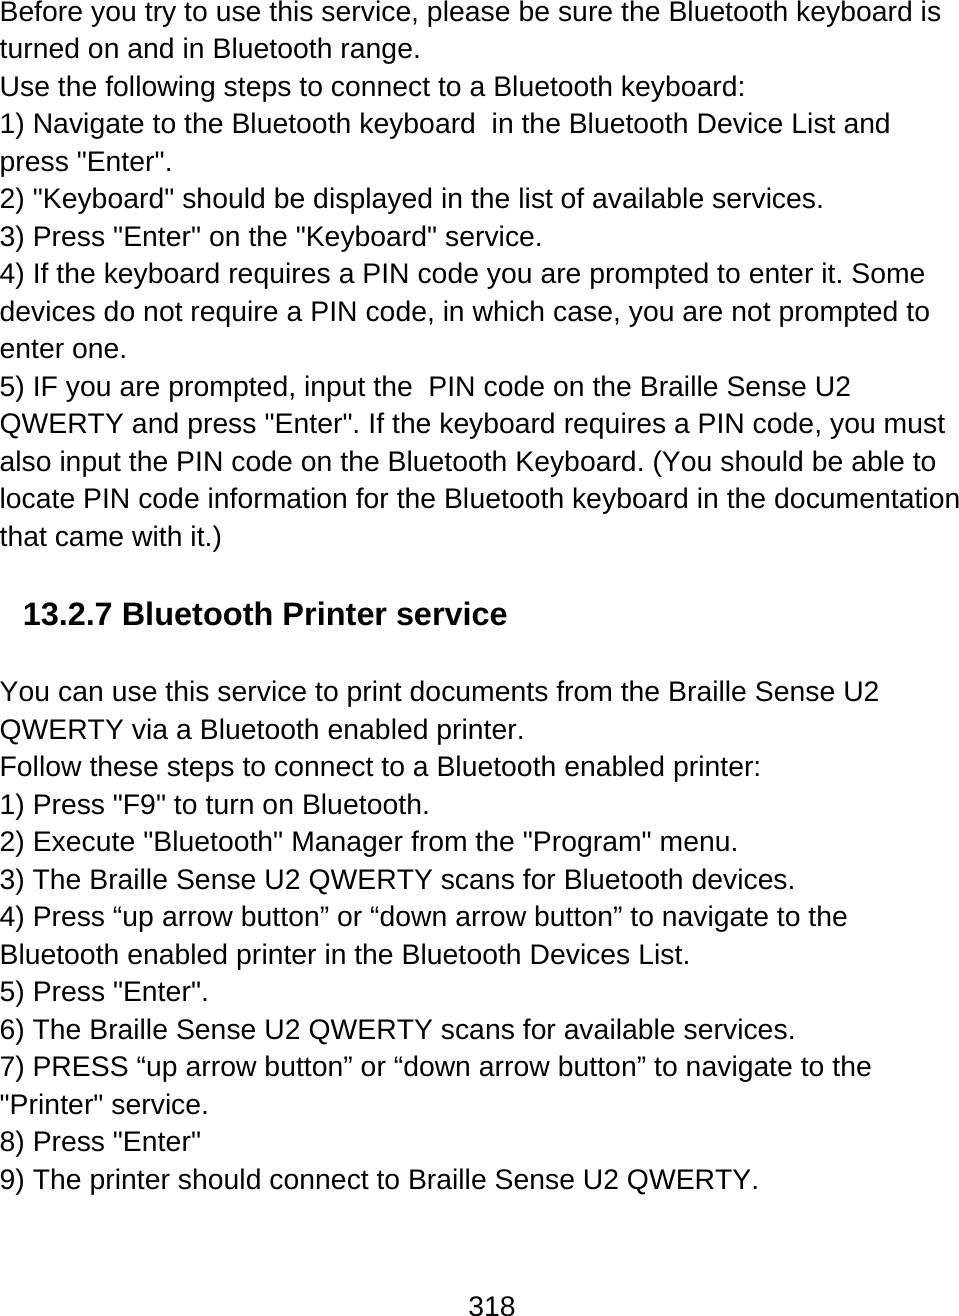 318  Before you try to use this service, please be sure the Bluetooth keyboard is turned on and in Bluetooth range. Use the following steps to connect to a Bluetooth keyboard: 1) Navigate to the Bluetooth keyboard  in the Bluetooth Device List and press &quot;Enter&quot;.  2) &quot;Keyboard&quot; should be displayed in the list of available services.  3) Press &quot;Enter&quot; on the &quot;Keyboard&quot; service. 4) If the keyboard requires a PIN code you are prompted to enter it. Some devices do not require a PIN code, in which case, you are not prompted to enter one.  5) IF you are prompted, input the  PIN code on the Braille Sense U2 QWERTY and press &quot;Enter&quot;. If the keyboard requires a PIN code, you must also input the PIN code on the Bluetooth Keyboard. (You should be able to locate PIN code information for the Bluetooth keyboard in the documentation that came with it.)  13.2.7 Bluetooth Printer service  You can use this service to print documents from the Braille Sense U2 QWERTY via a Bluetooth enabled printer.  Follow these steps to connect to a Bluetooth enabled printer: 1) Press &quot;F9&quot; to turn on Bluetooth. 2) Execute &quot;Bluetooth&quot; Manager from the &quot;Program&quot; menu. 3) The Braille Sense U2 QWERTY scans for Bluetooth devices.  4) Press “up arrow button” or “down arrow button” to navigate to the Bluetooth enabled printer in the Bluetooth Devices List. 5) Press &quot;Enter&quot;. 6) The Braille Sense U2 QWERTY scans for available services. 7) PRESS “up arrow button” or “down arrow button” to navigate to the &quot;Printer&quot; service. 8) Press &quot;Enter&quot;  9) The printer should connect to Braille Sense U2 QWERTY.  